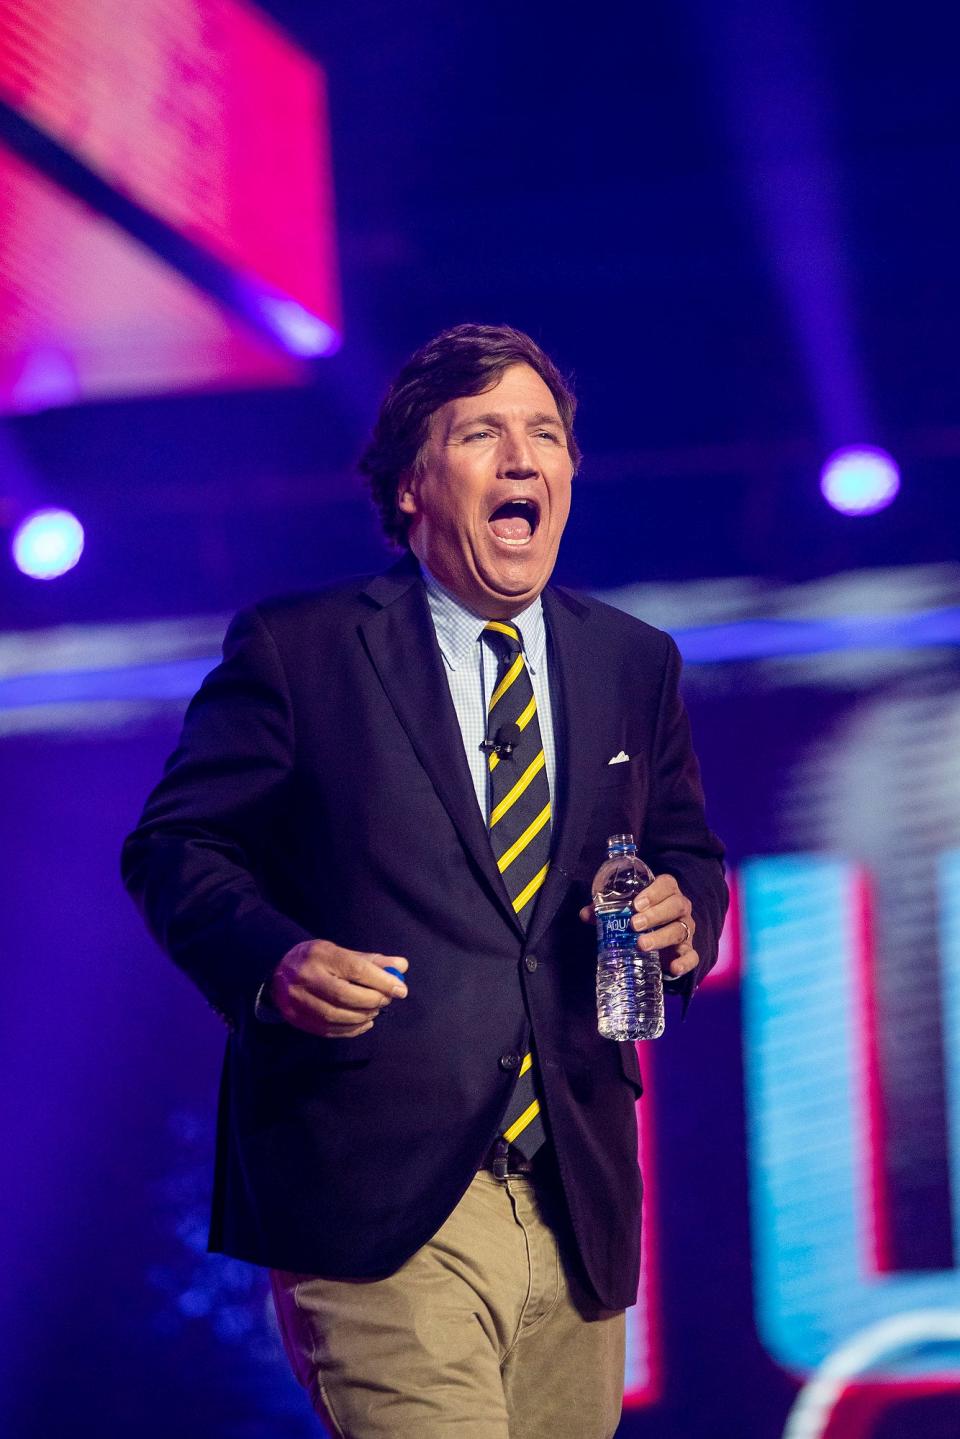 Tucker Carlson speaks during the first day of the AmericaFest hosted by Turning Point USA on Saturday, Dec. 18, 2021, in Phoenix.